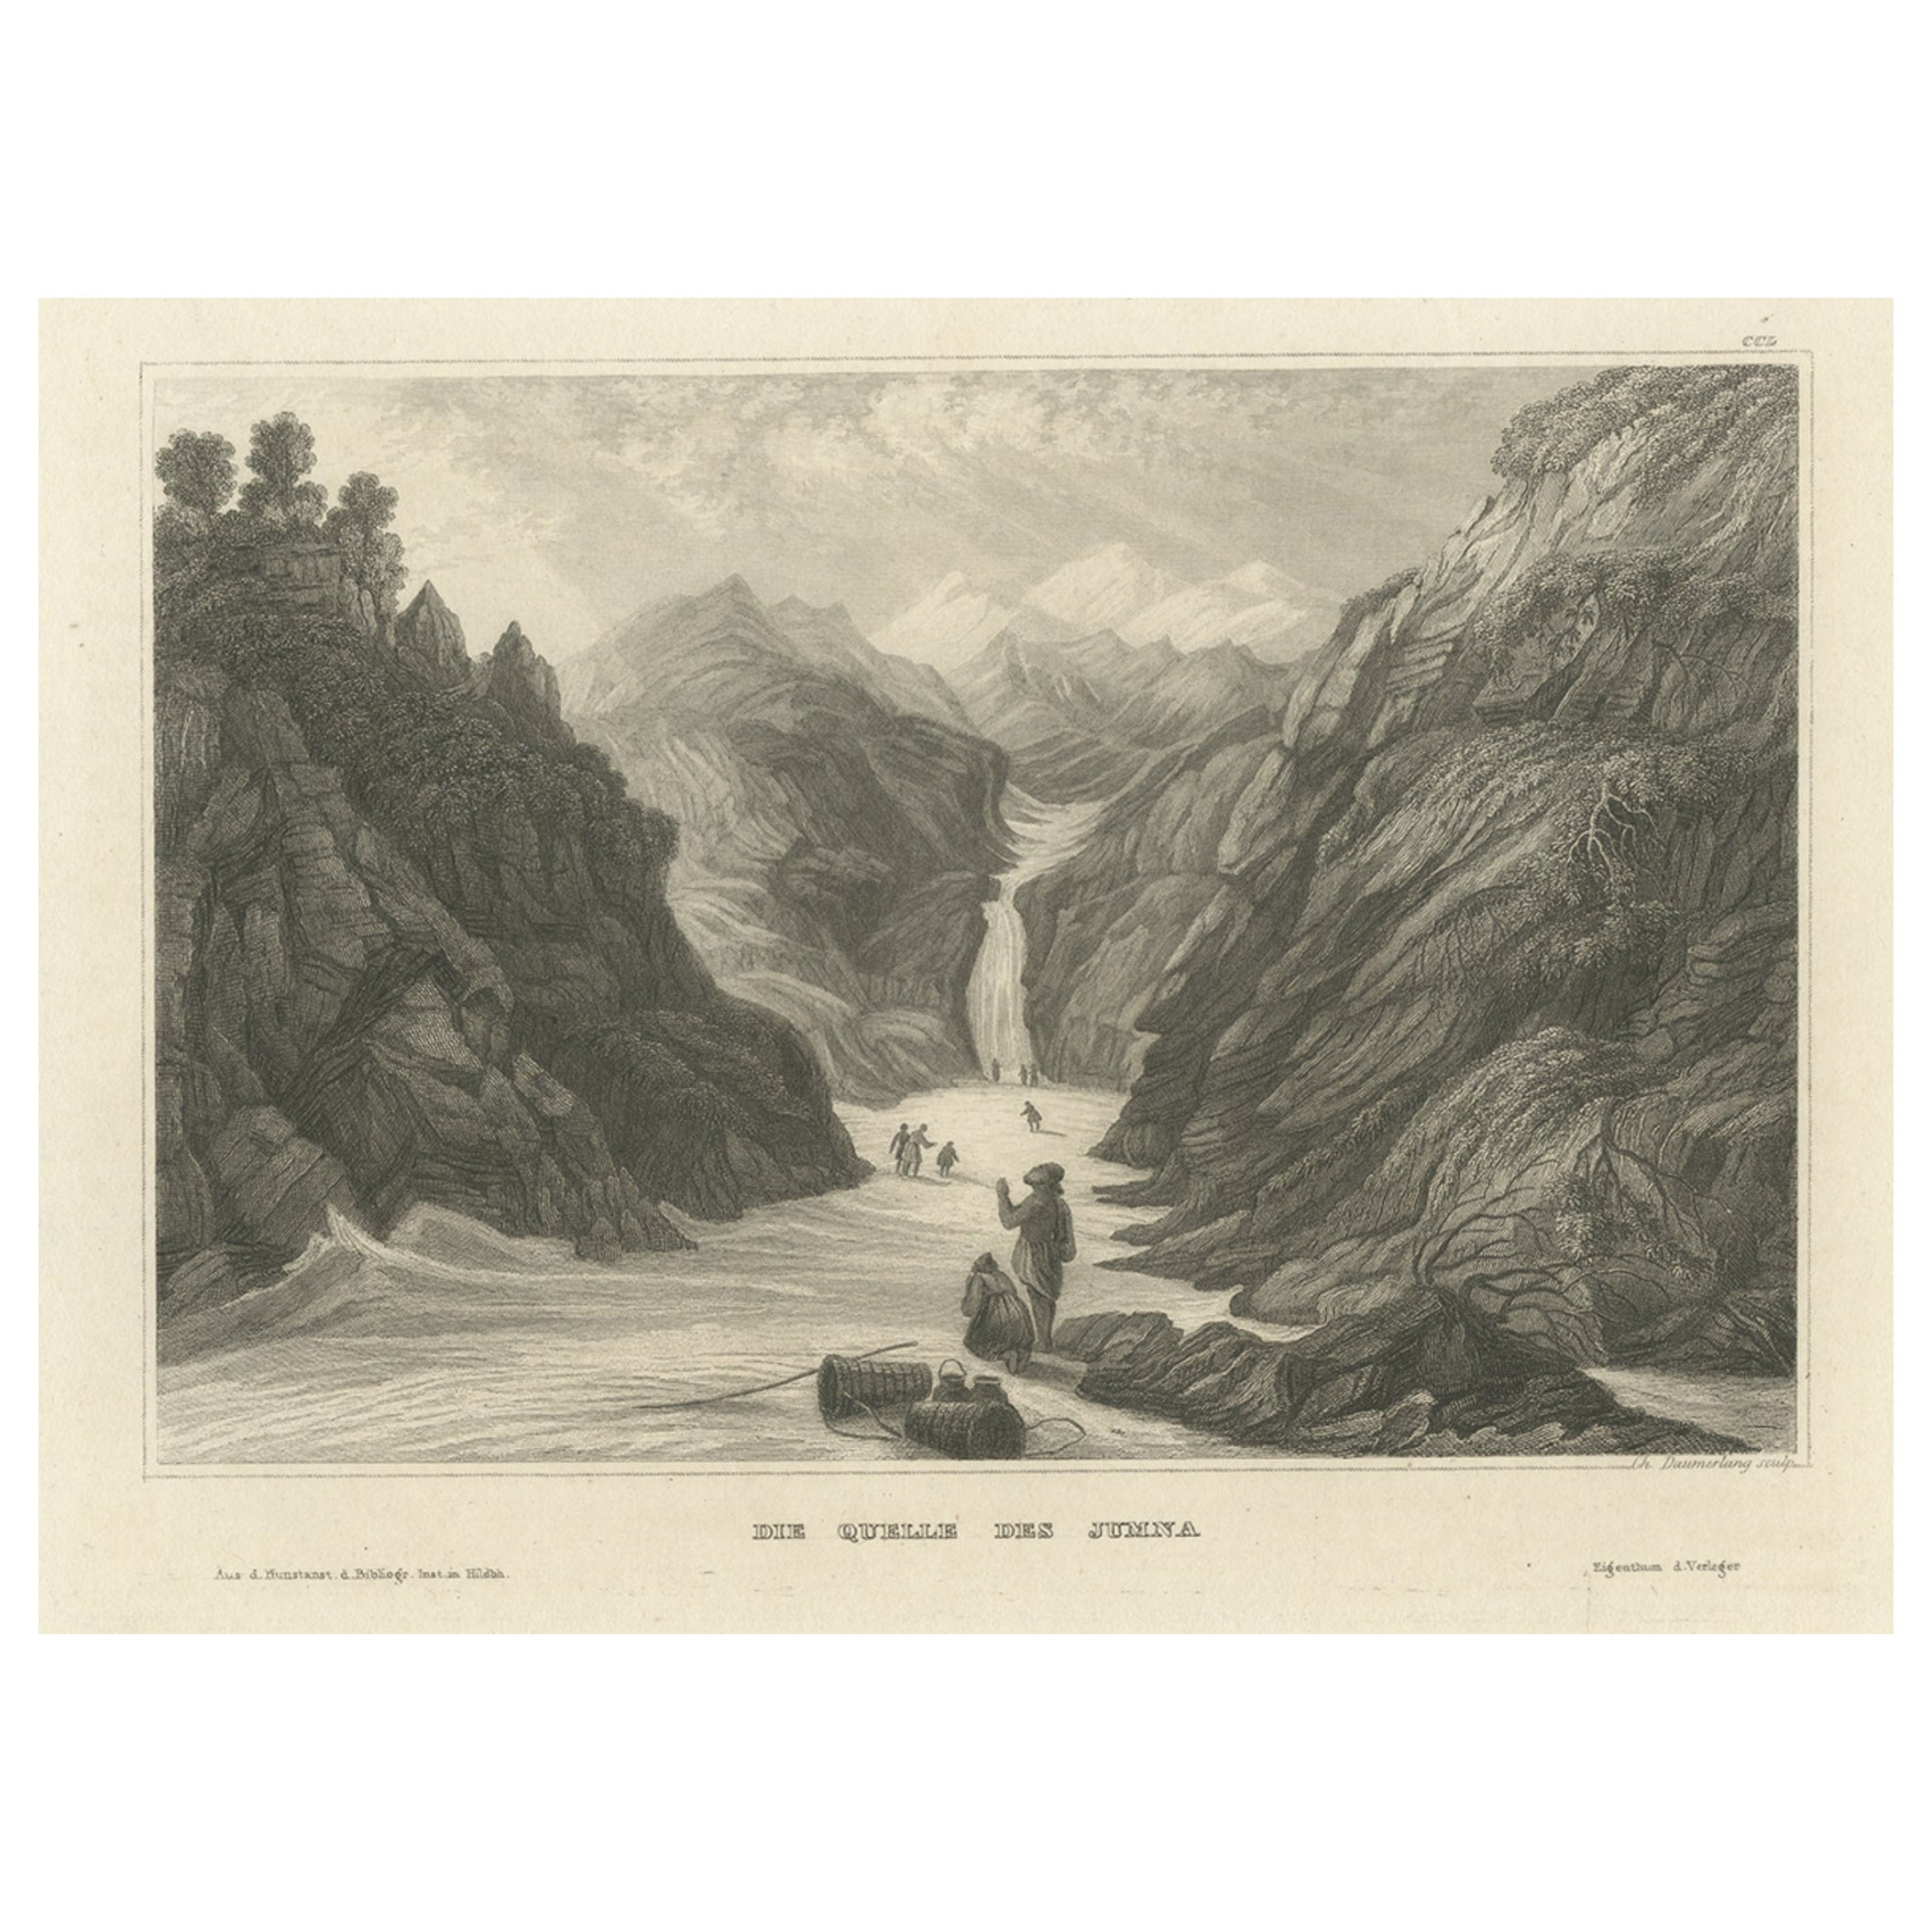 Antique Print of the Yamuna River in India, 1839